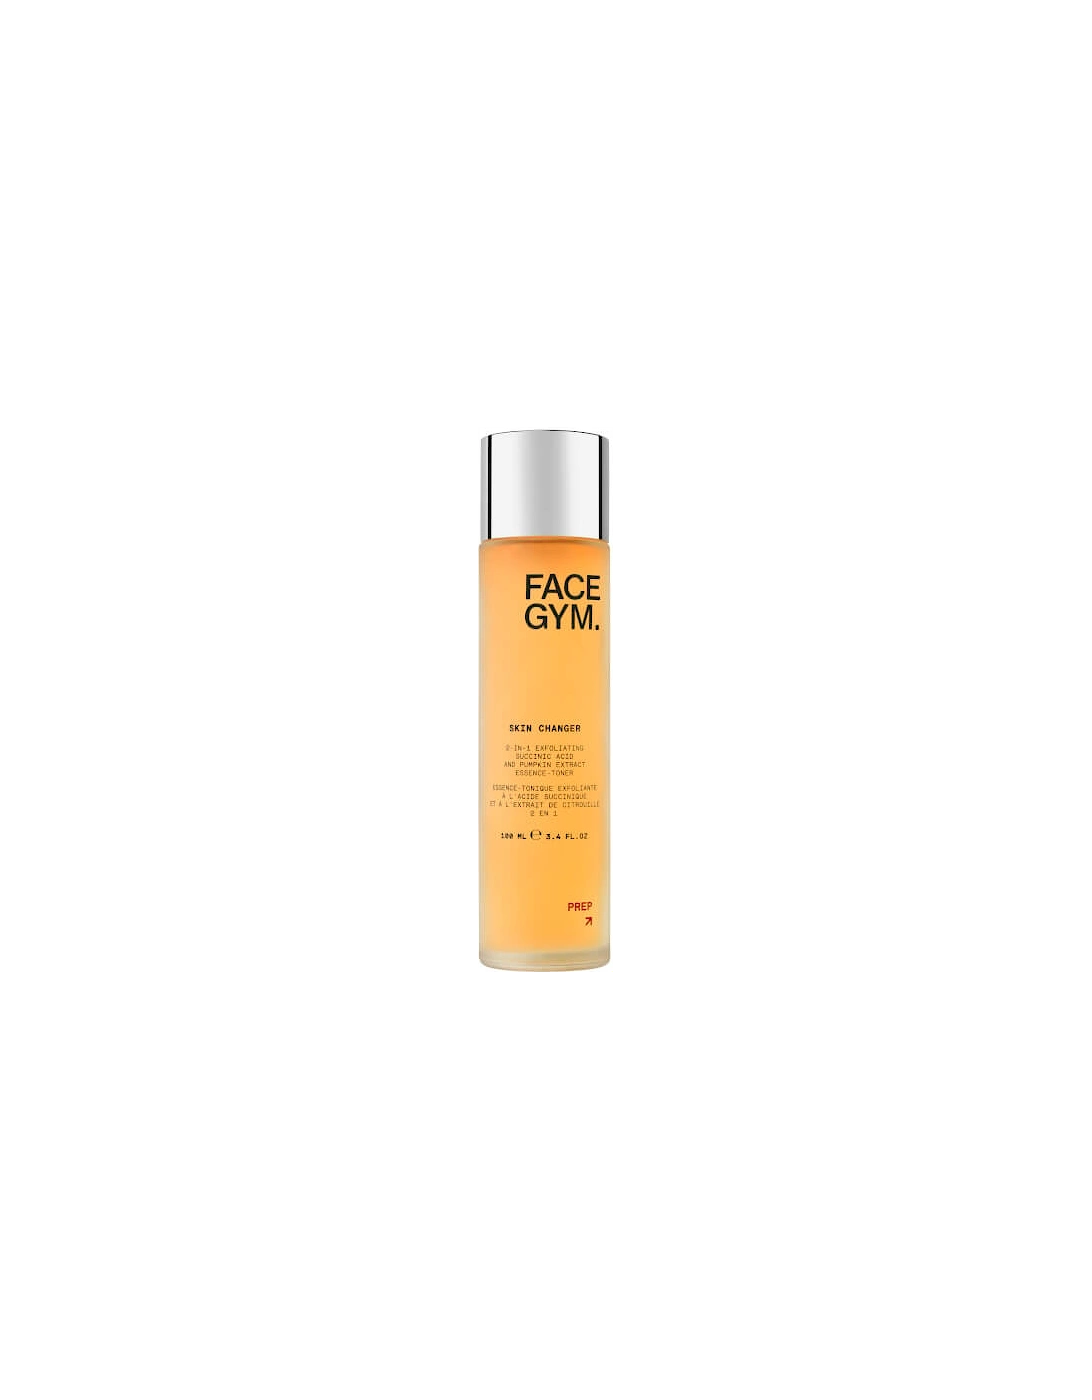 Skin Changer 2-in-1 Exfoliating Succinic Acid and Pumpkin Extract Essence Toner 100ml - - Skin Changer 2-in-1 Exfoliating Succinic Acid and Pumpkin Extract Essence Toner 100ml - Skin Changer 2-in-1 Exfoliating Succinic Acid and Pumpkin Extract Essence Toner 30ml, 2 of 1